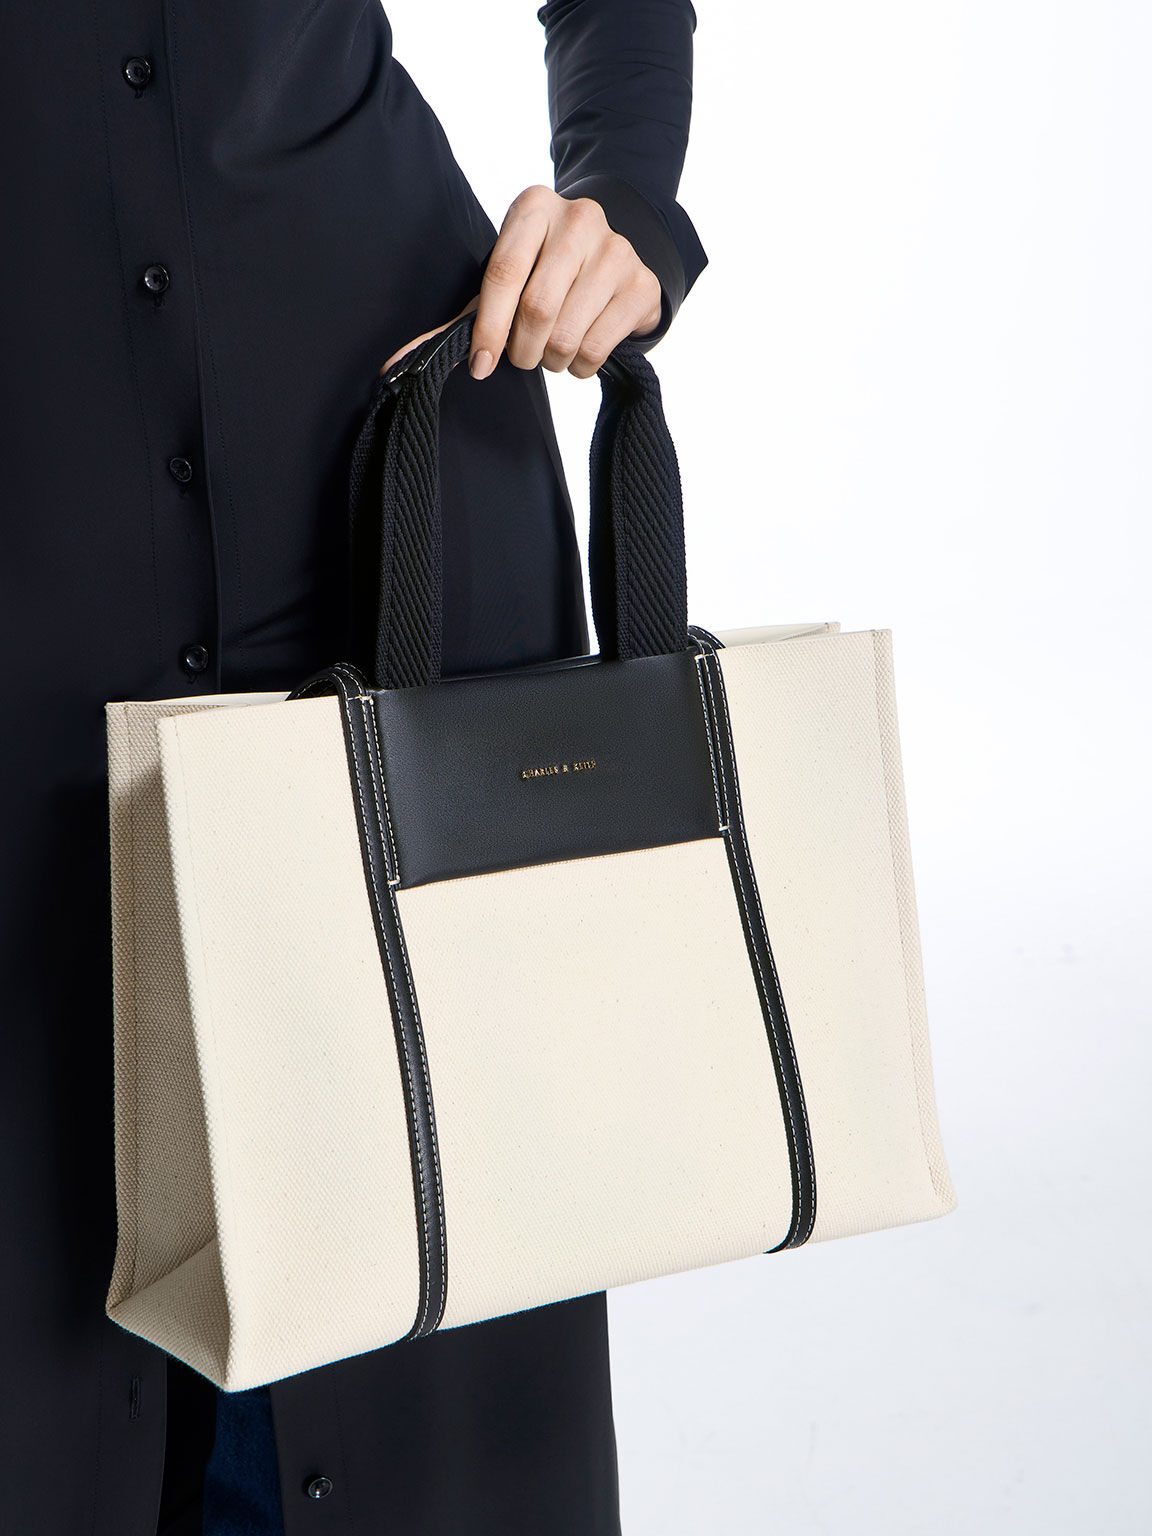 CLN - Make it sleek and chic. 🖤 Shop them here: Asher Tote: cln